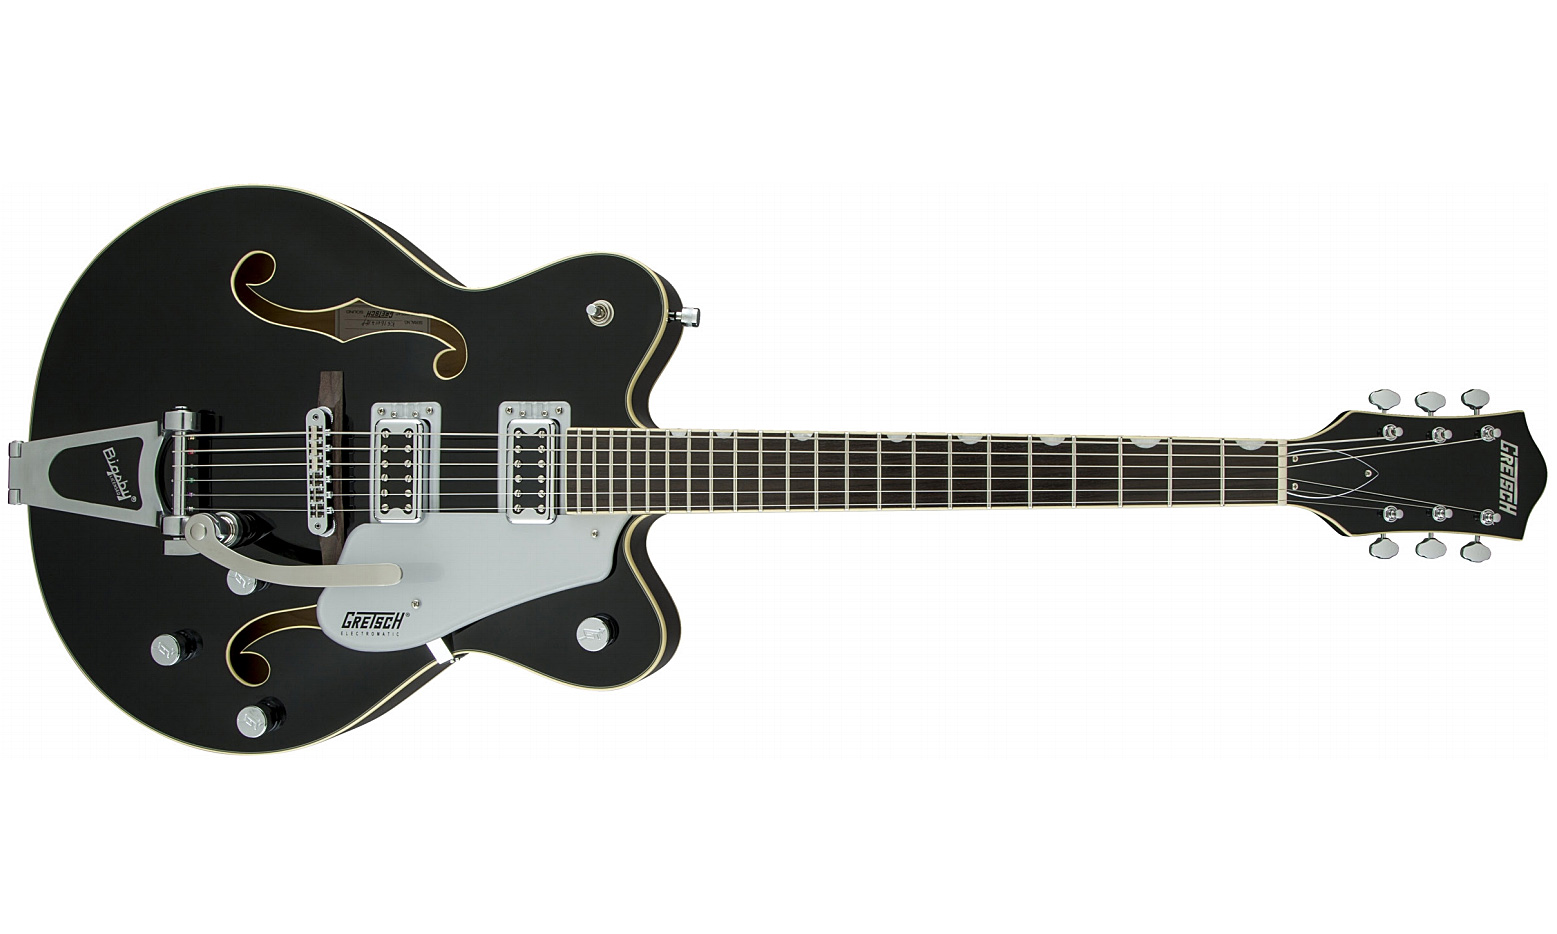 Gretsch G5422t Electromatic Hollow Body 2016 Bigsby - Black - Hollow-body electric guitar - Variation 1